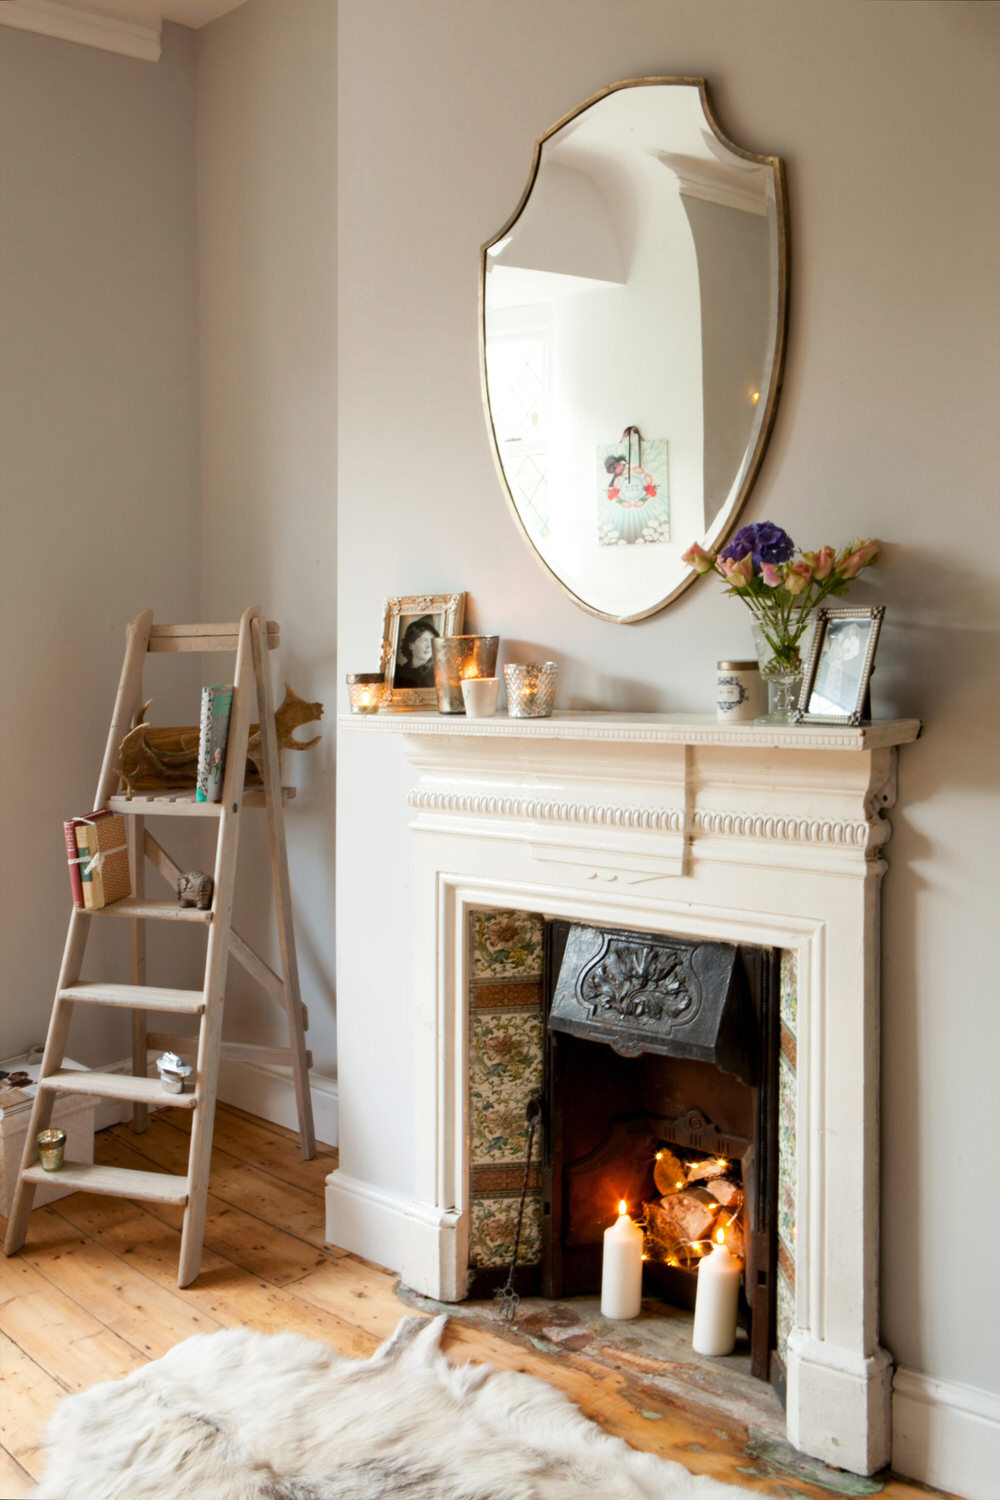 Fire surround with shield mirror